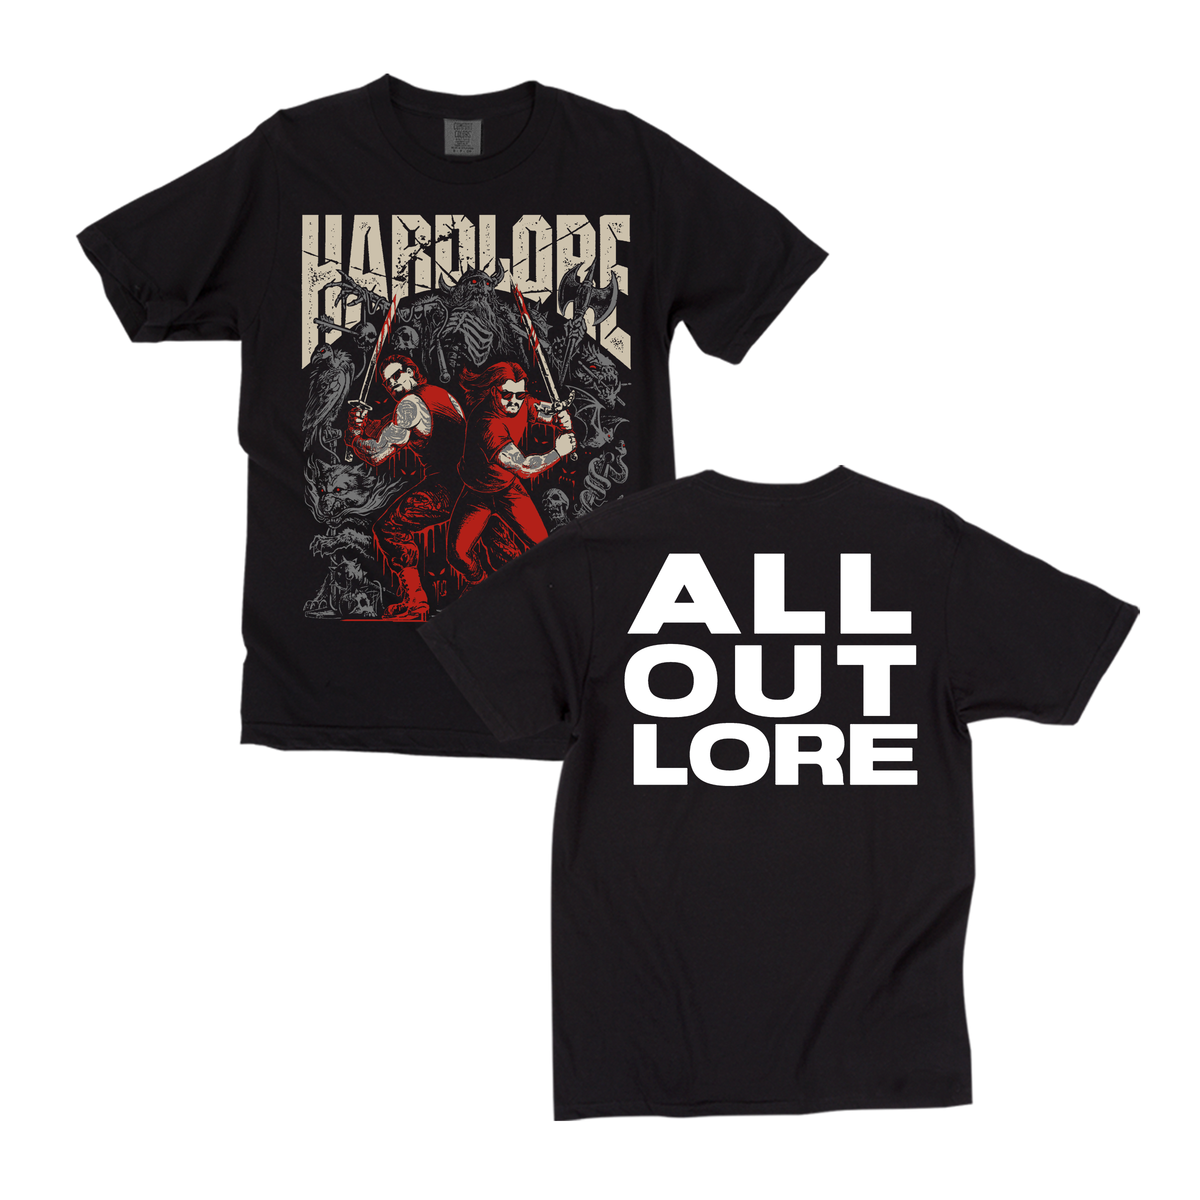 Hardlore All Out Lore T-Shirt